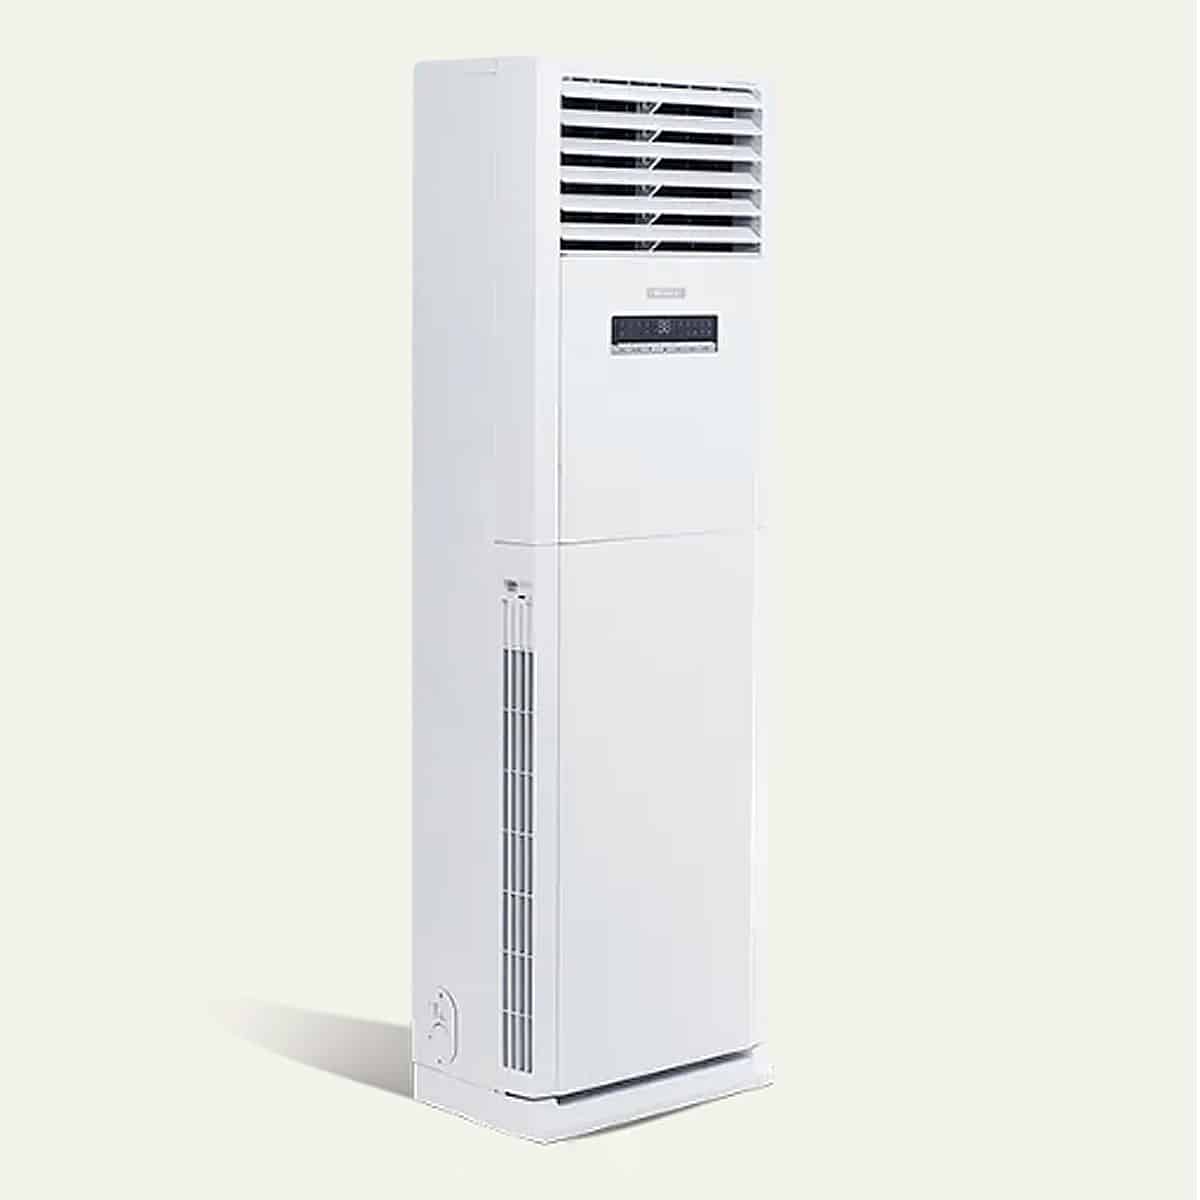 Gree 5.0HP R410a Inverter Floor Standing Air Conditioner with Wifi